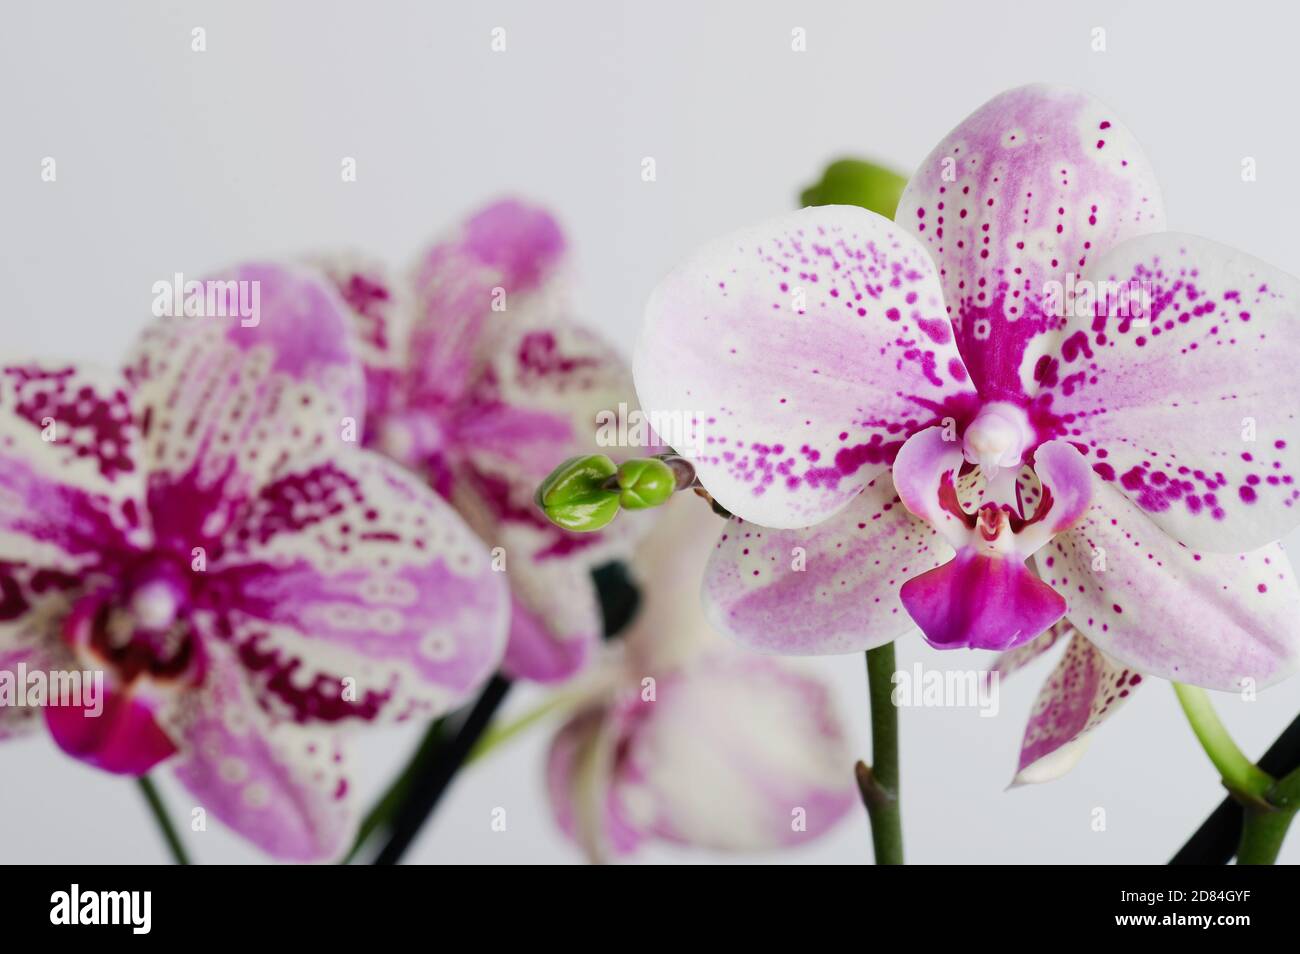 White with purple dots orchid flower leafs isolated on studio background Stock Photo